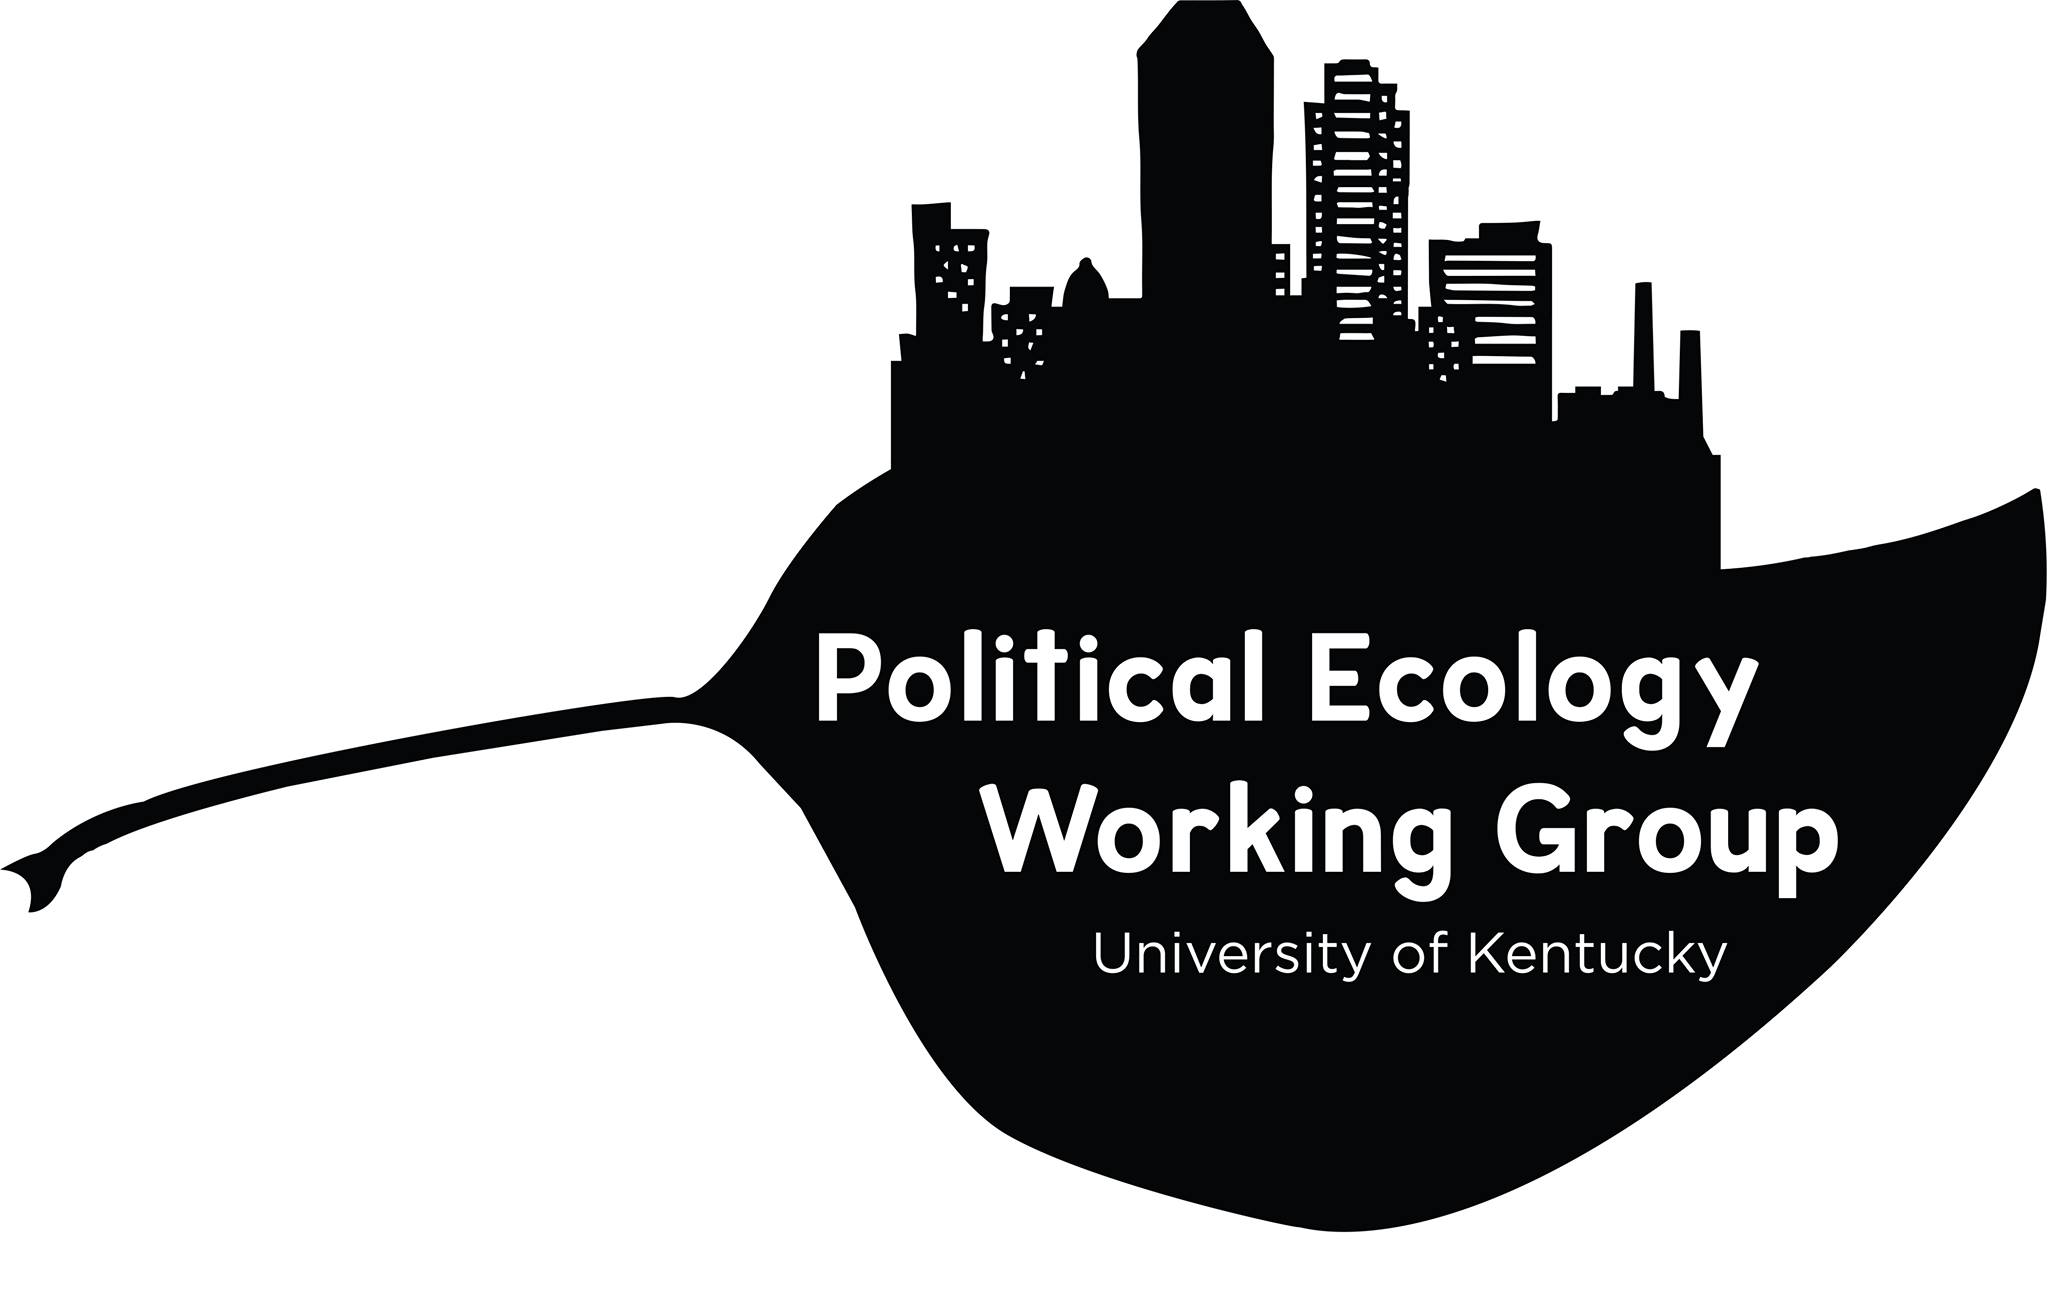 Dimensions of Political Ecology 2016